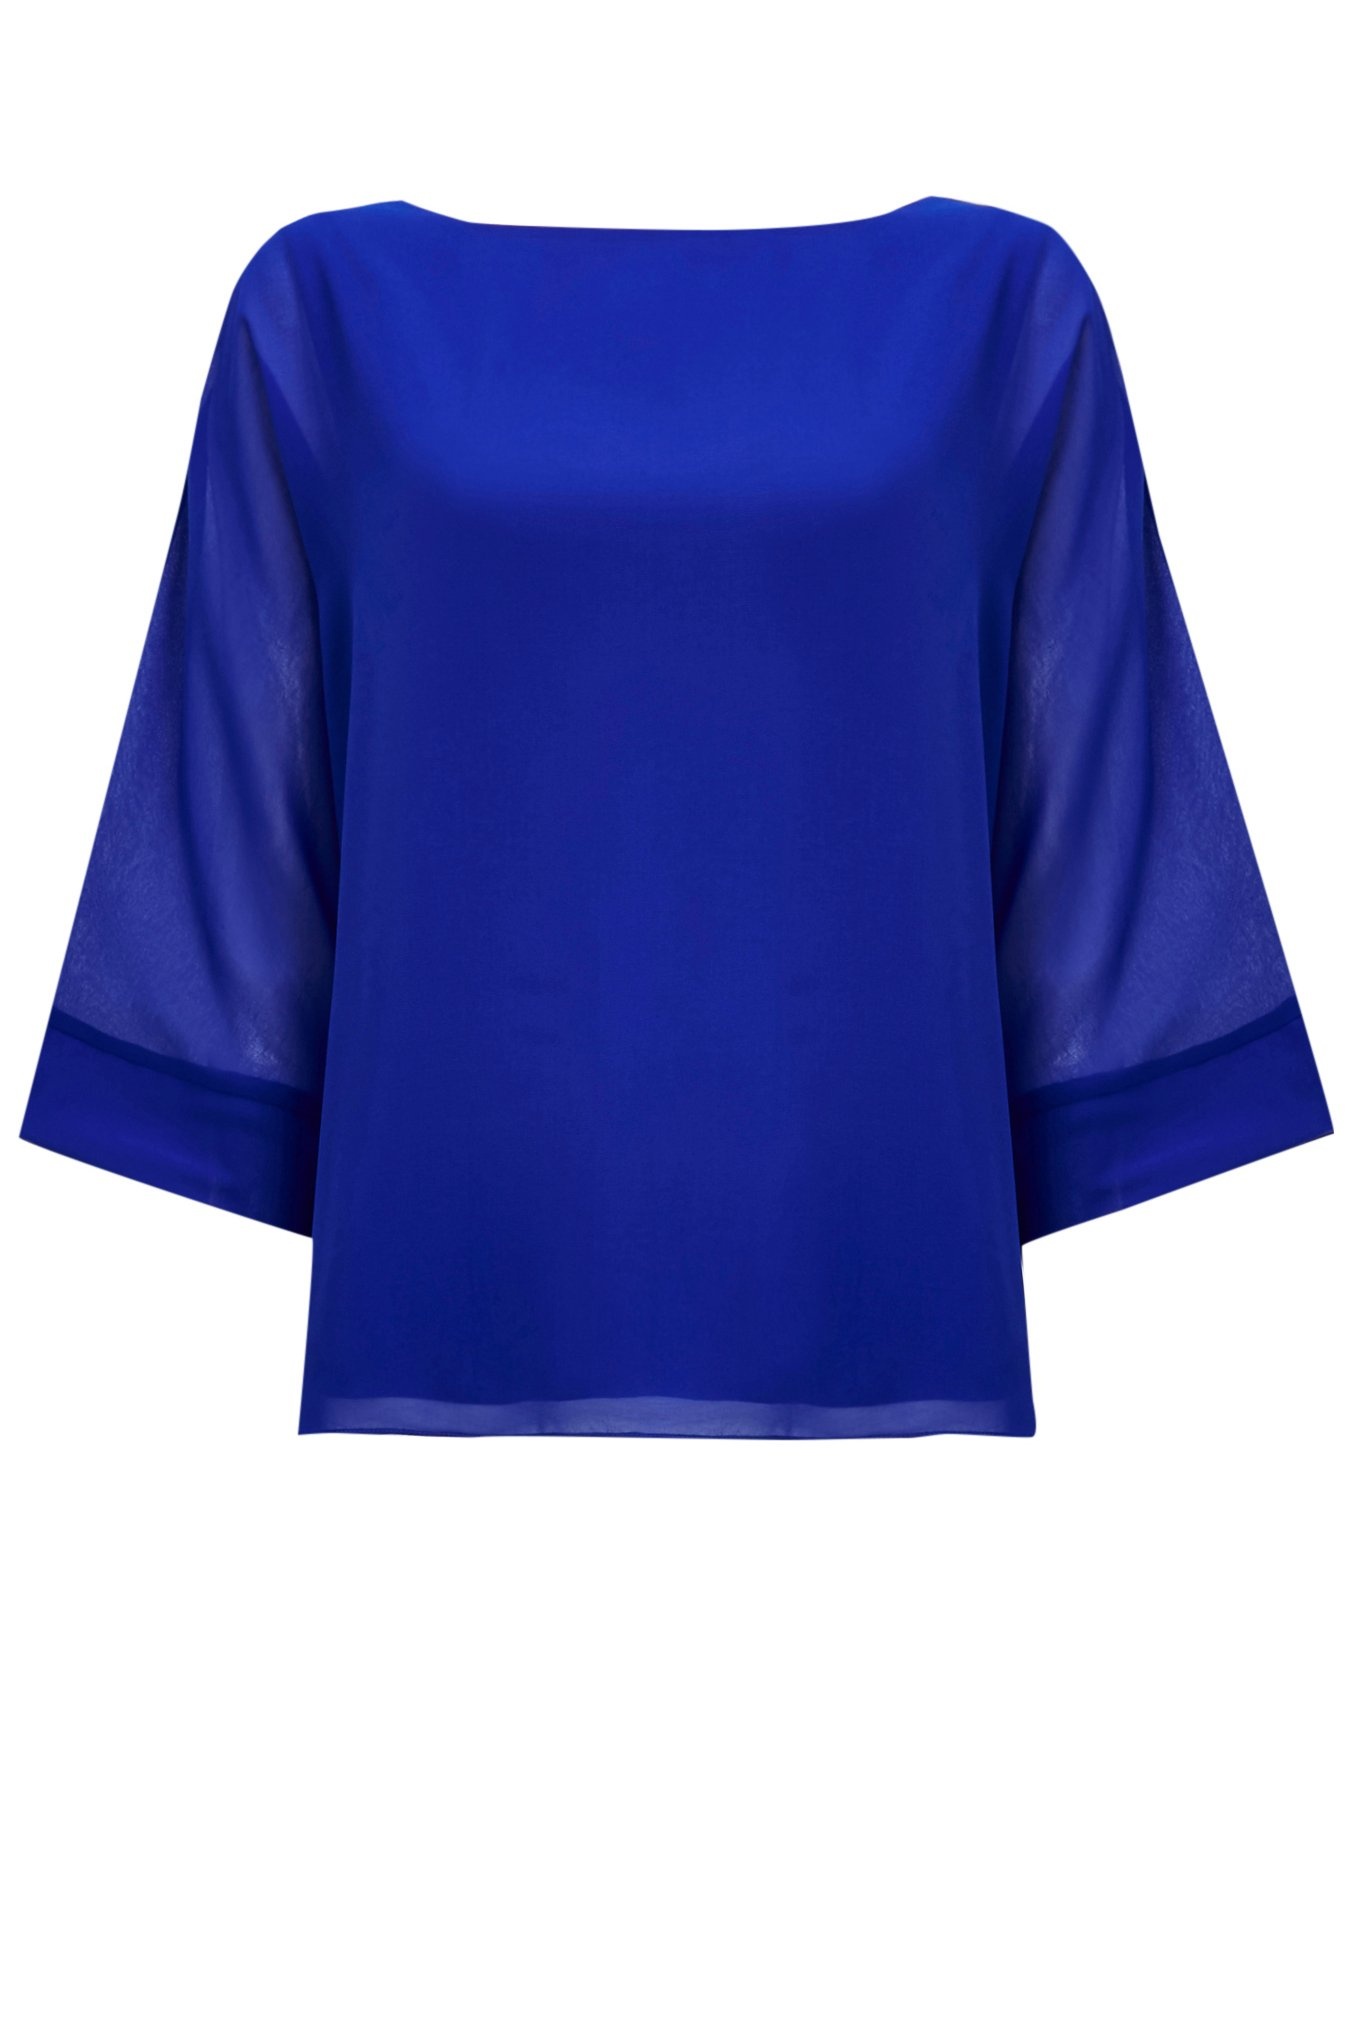 Cobalt Blue Overlay Top - Hello! We are wt+